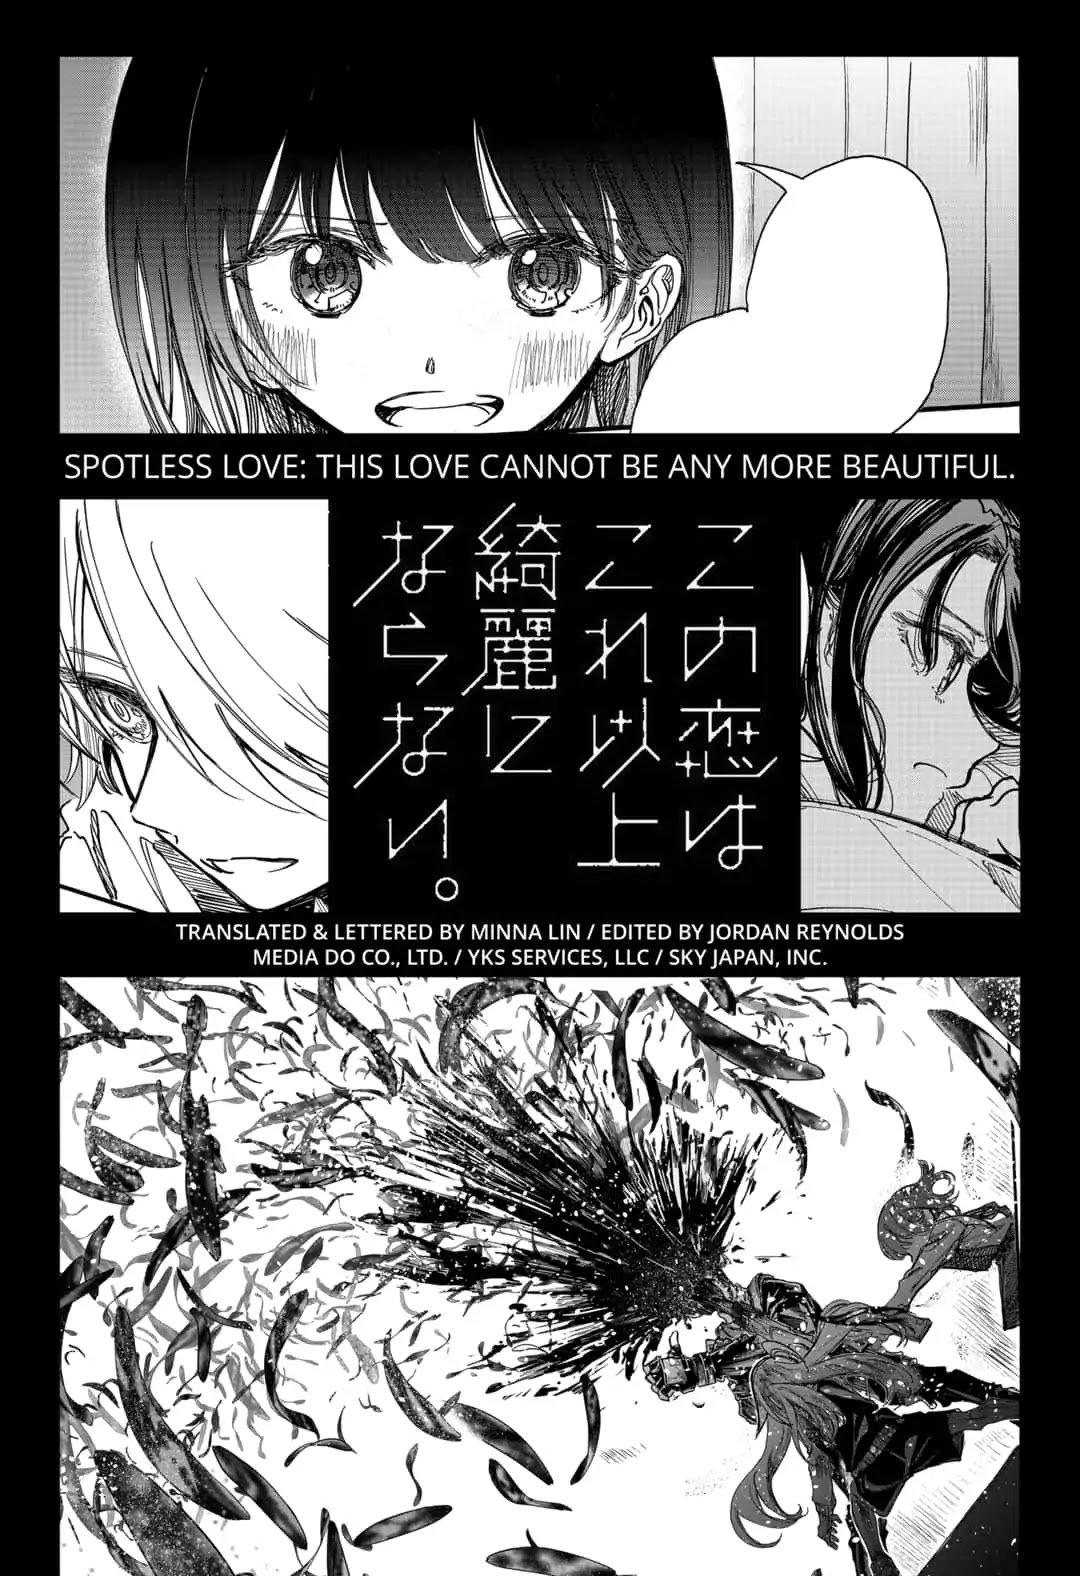 This Love Cannot Be Any More Beautiful - Page 2